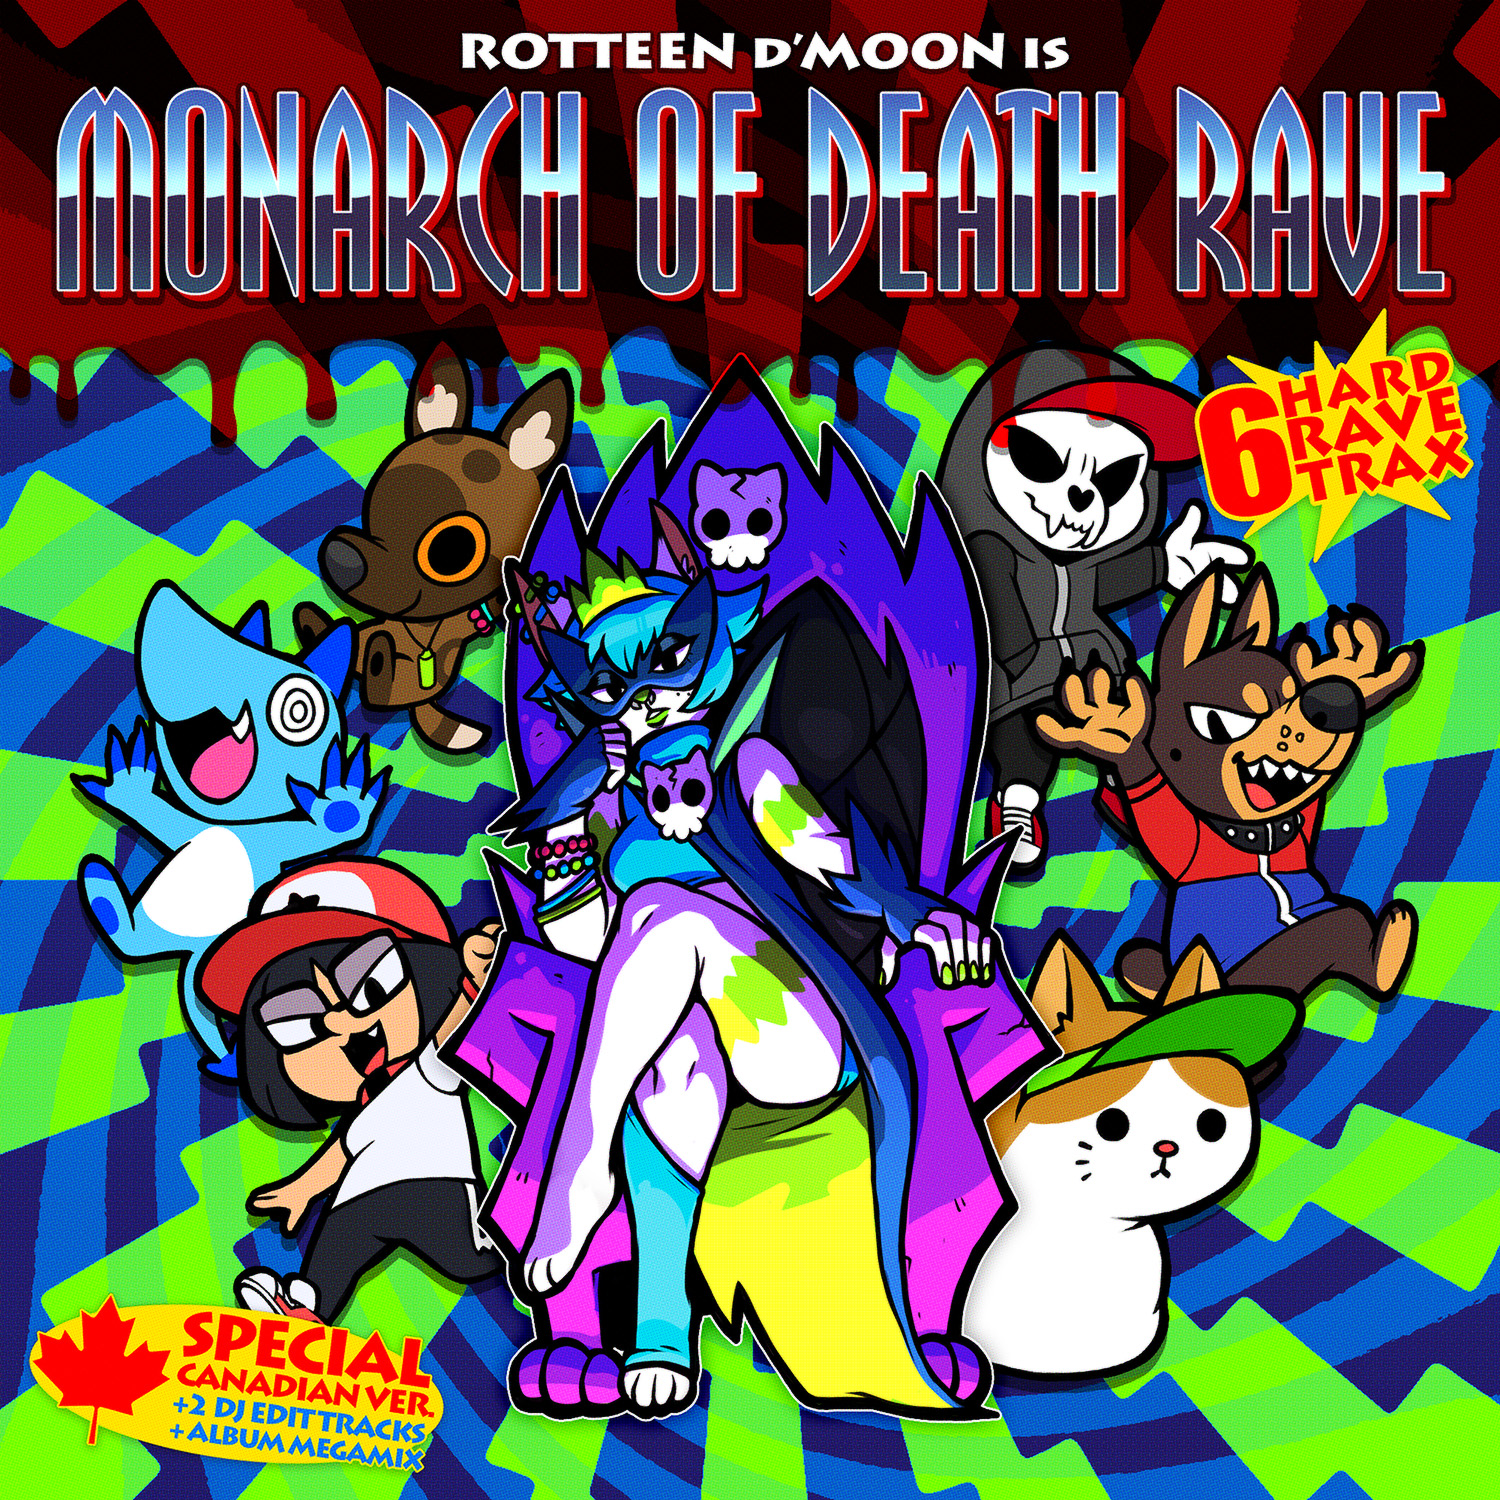 the cover art for the album 'Monarch of Death Rave' by Rotteen